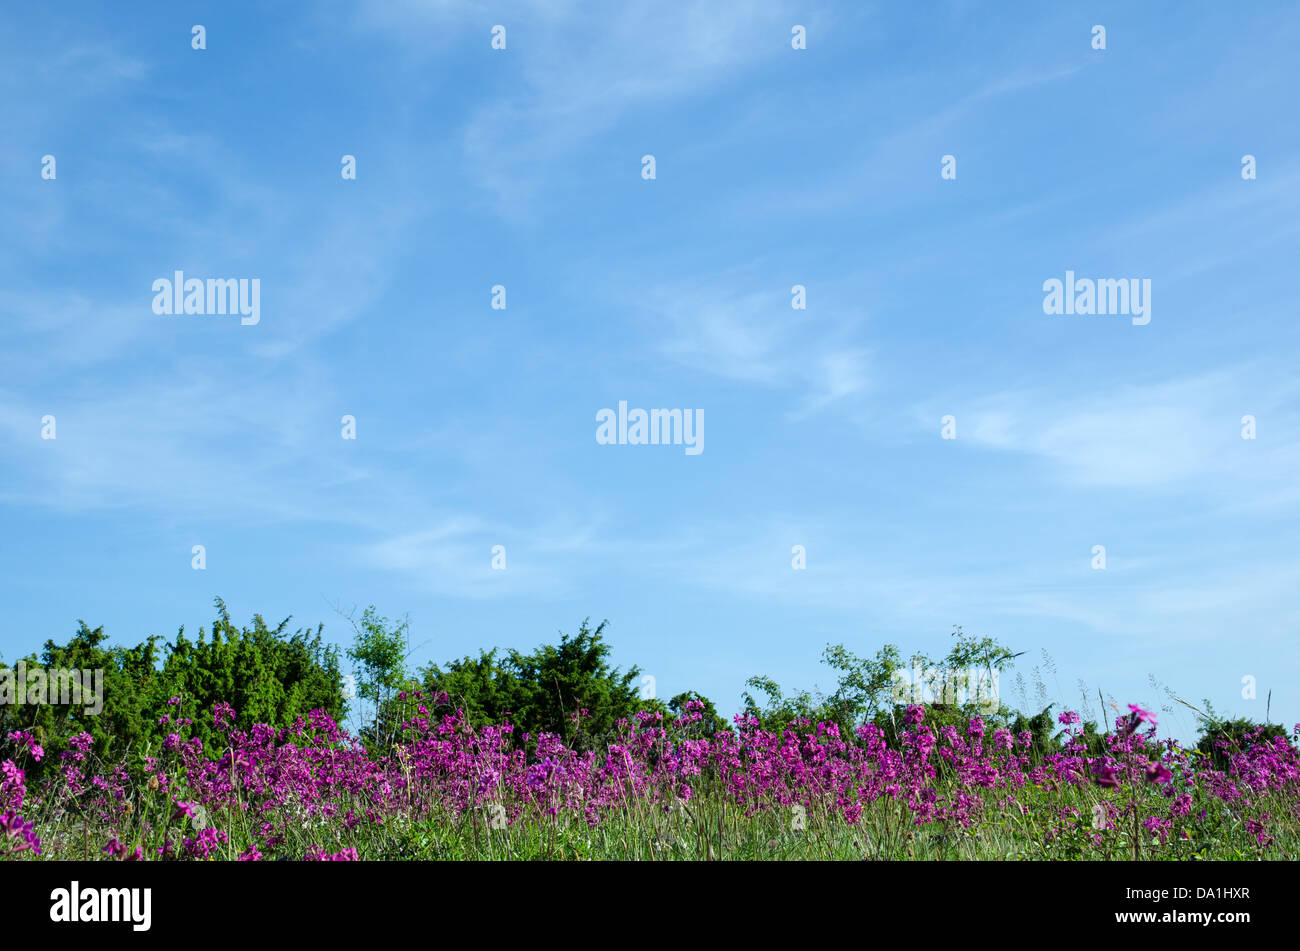 Colorful summer meadow with sticky catchfly an junipers at a blue sky. From the island Oland in Sweden. Stock Photo